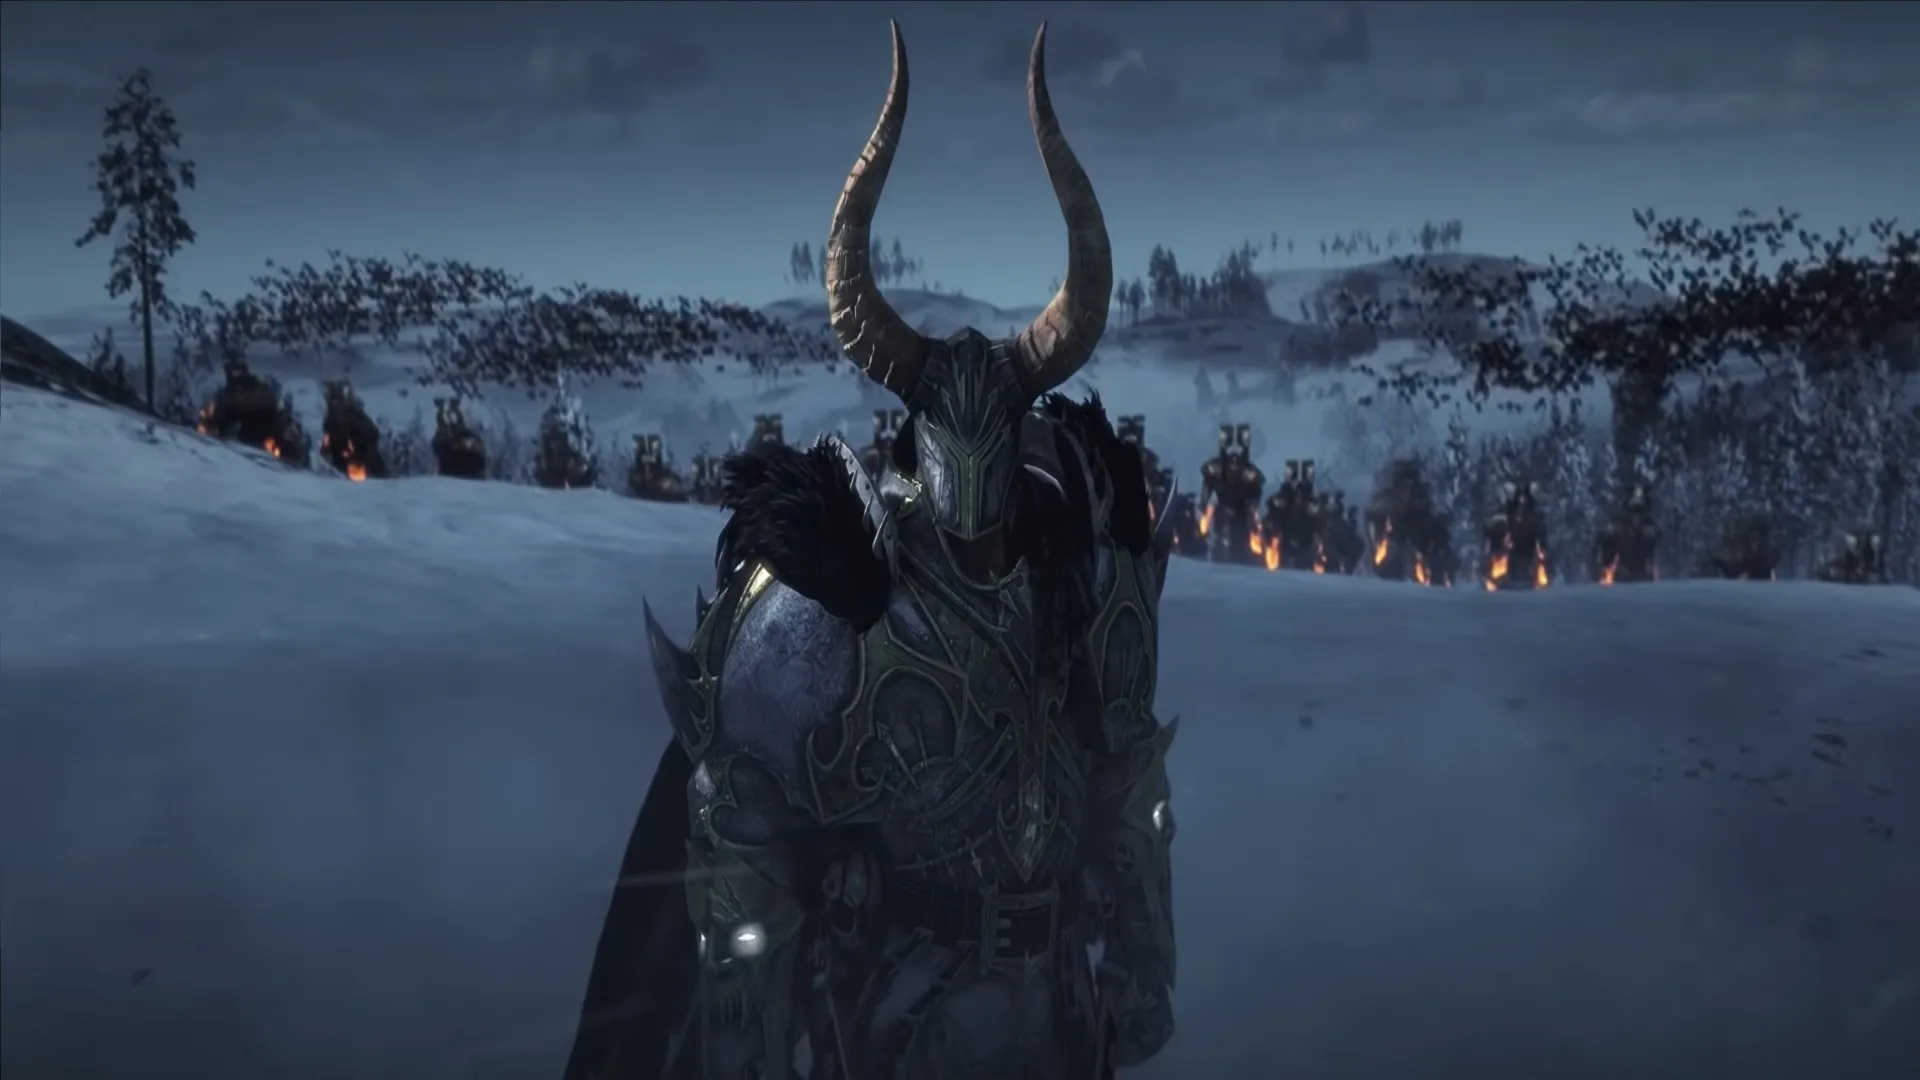 Total War: Warhammer III Launches with Game Pass for PC on